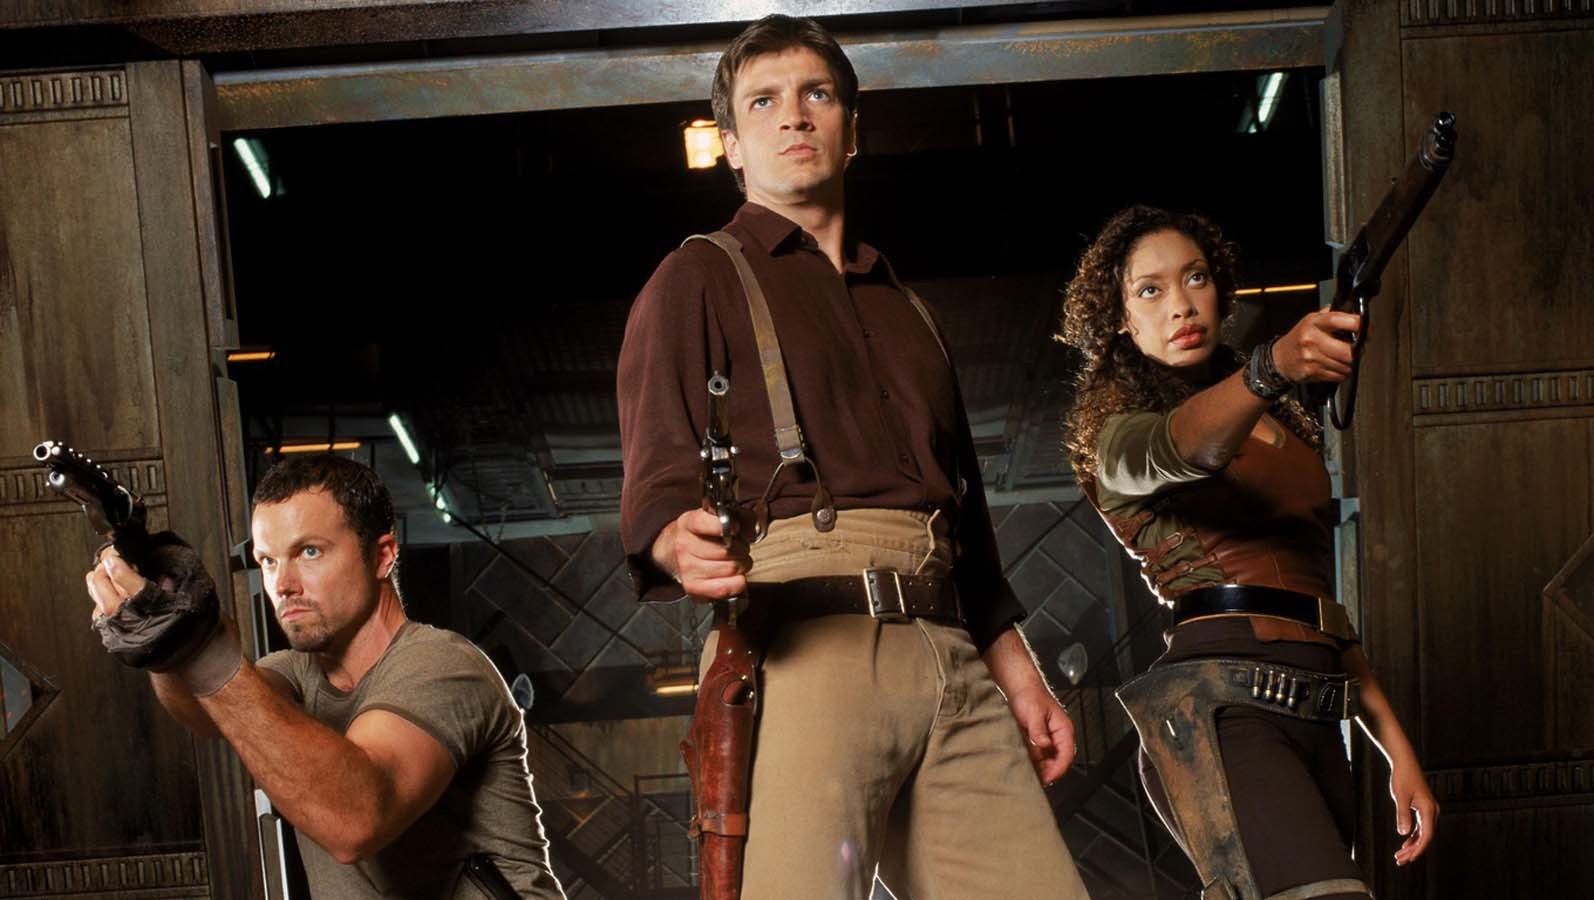 People 1594x900 Firefly Nathan Fillion Gina Torres Adam Baldwin TV series science fiction